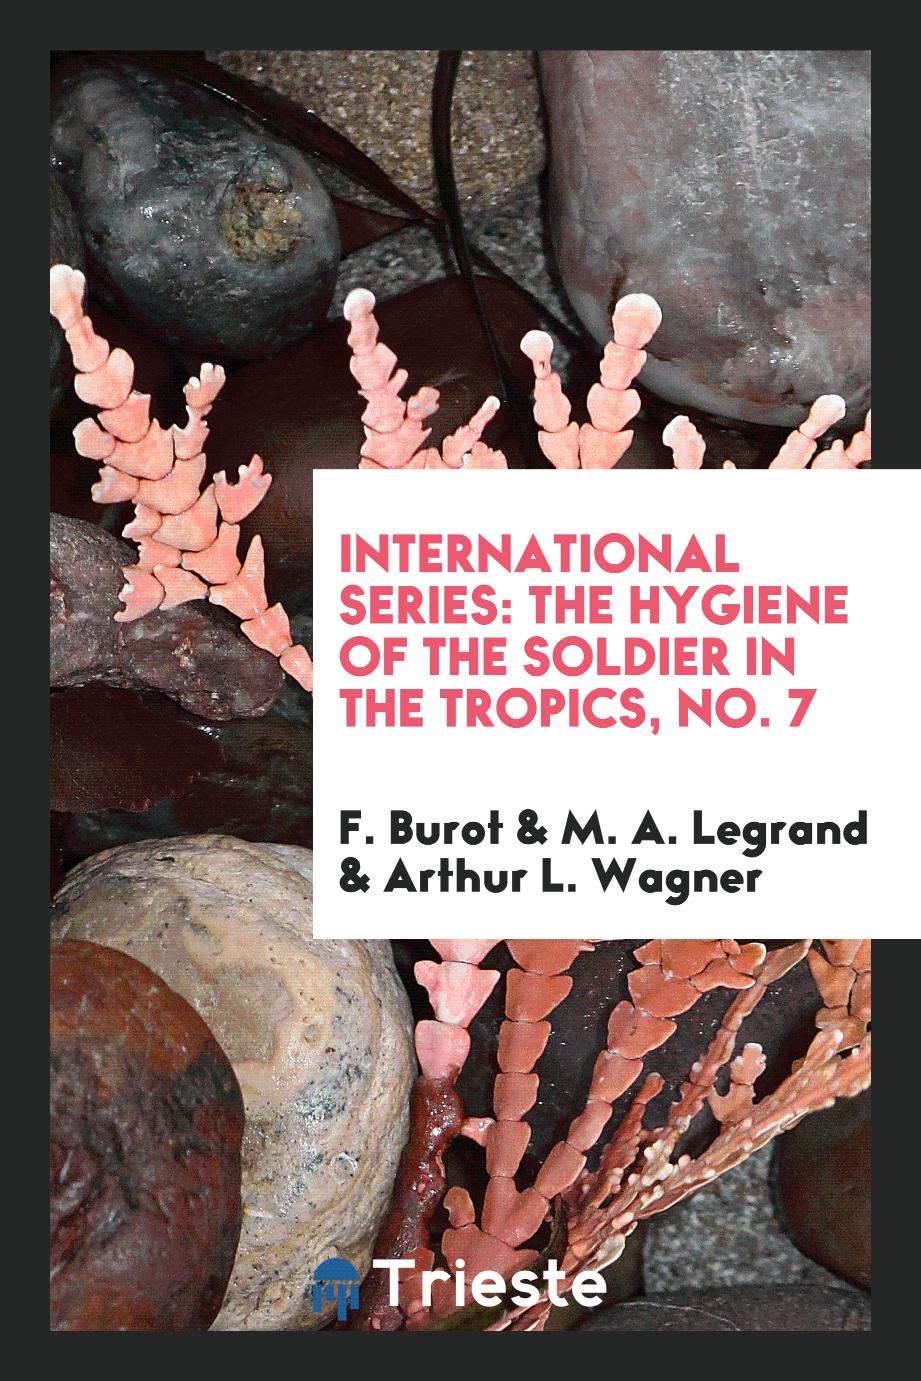 International Series: The Hygiene of the Soldier in the Tropics, No. 7